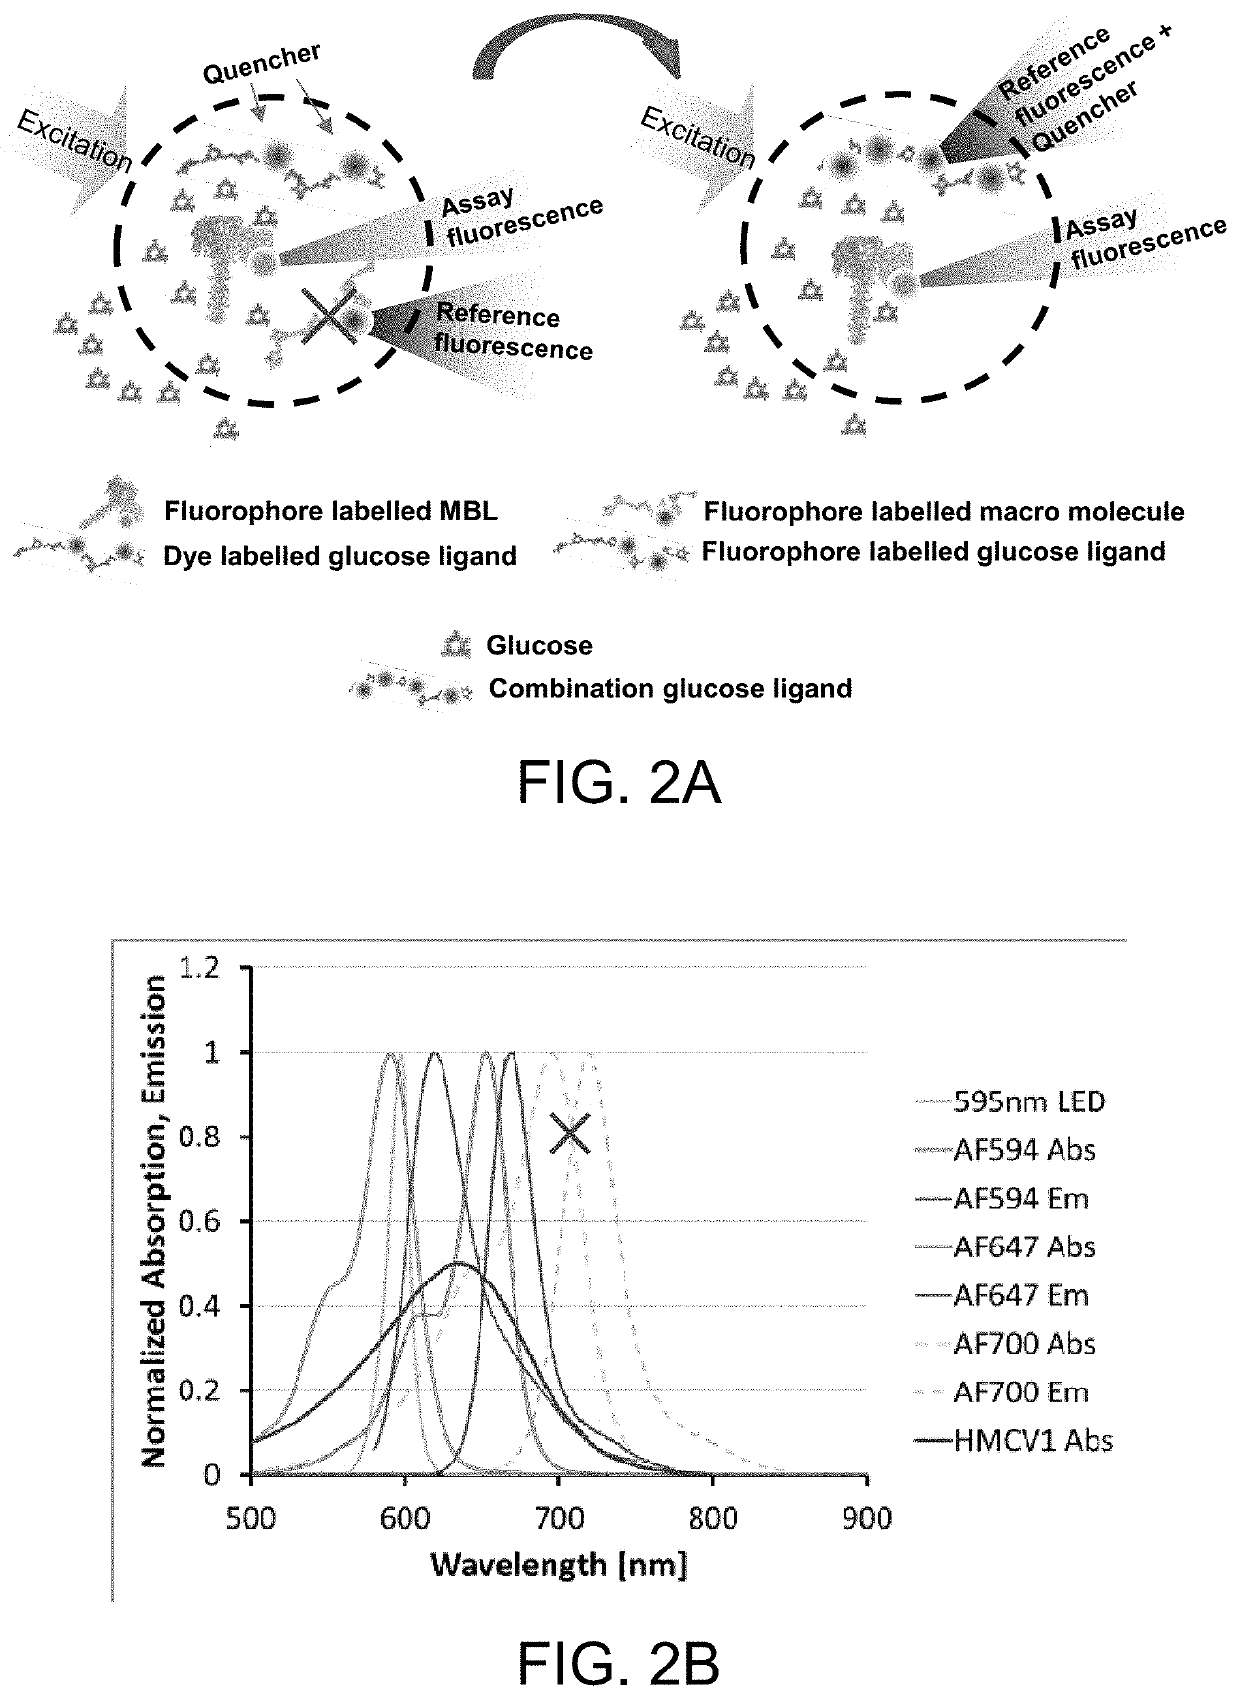 Modified-dextrans for use in optical glucose assays